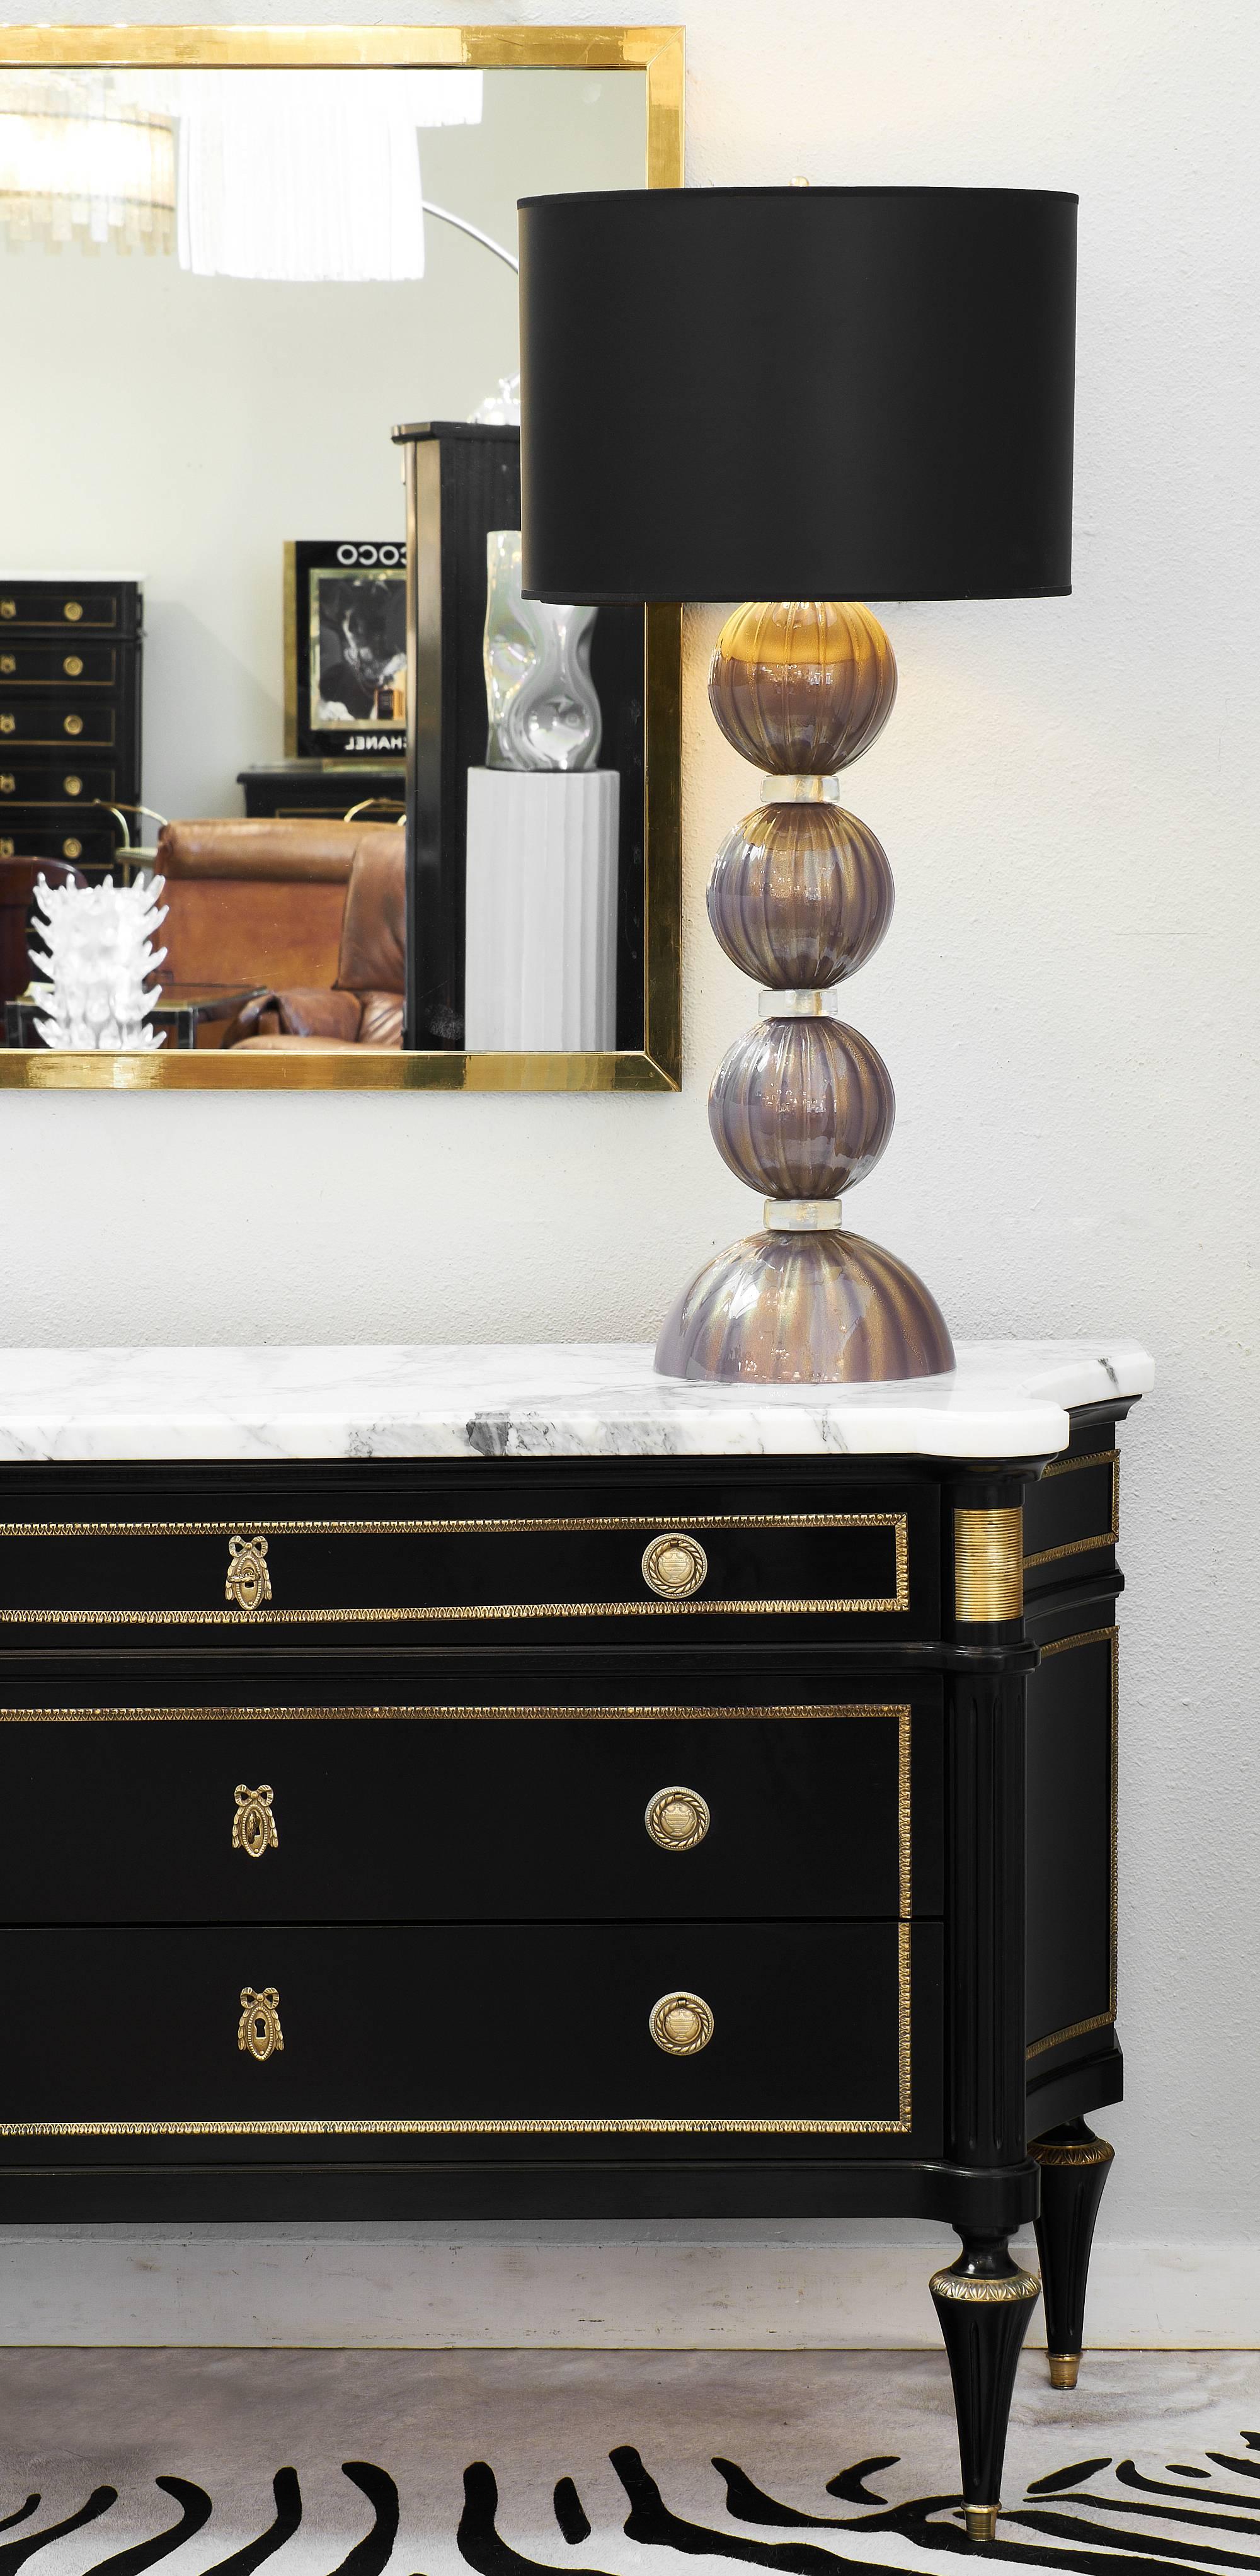 Wonderful antique French Louis XVI style chest of drawers made of mahogany that has been ebonized and finished with a museum quality French polish for a lovely luster. This piece has finely cast bronze hardware and gilt brass trim, the original